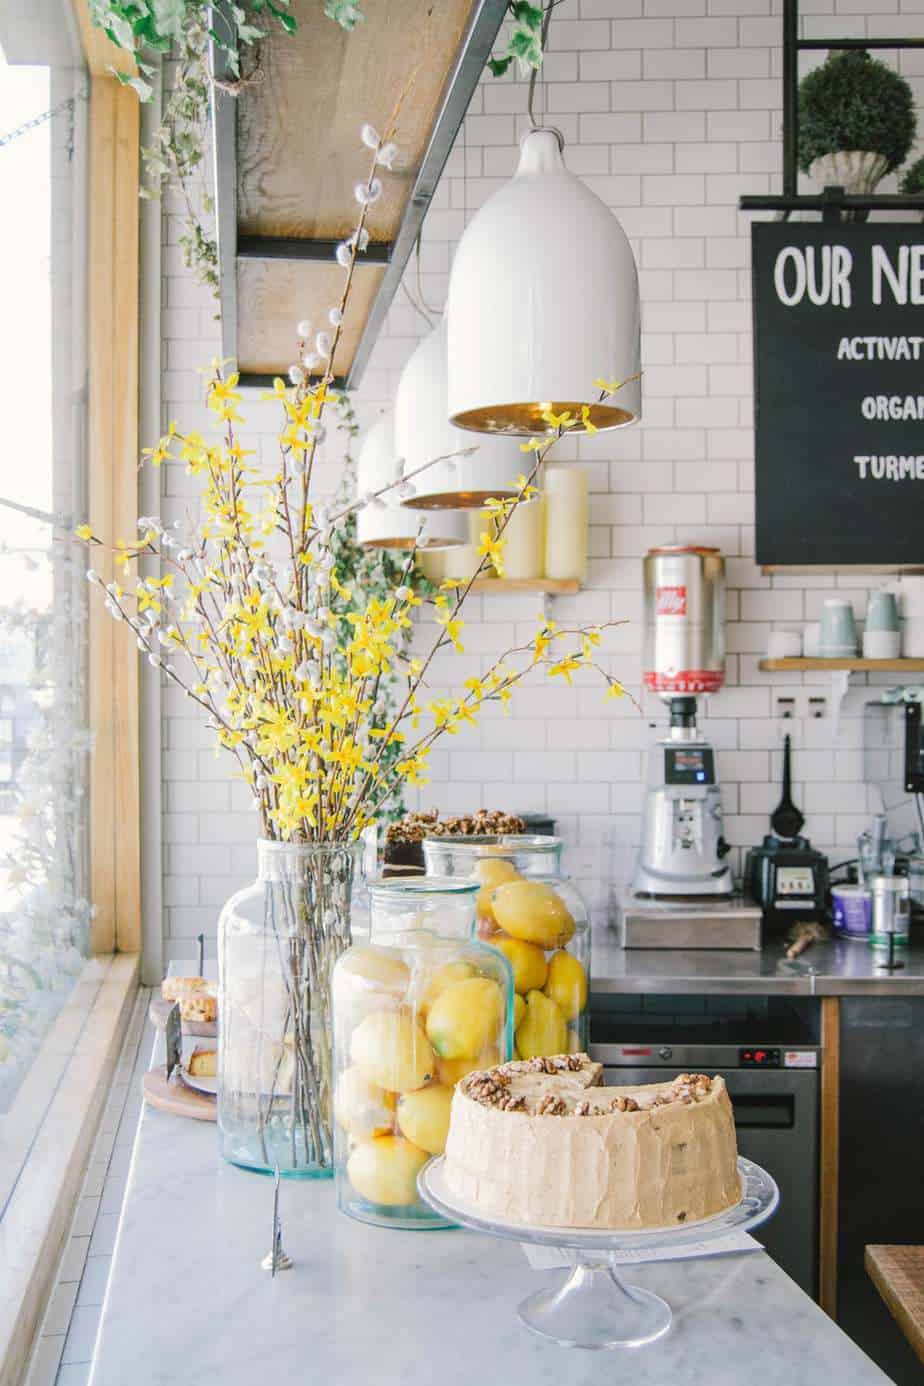 The white kitchen counter with a clear glass vase filled with yellow flowers and a cake on a stand with a piece taken out of it.